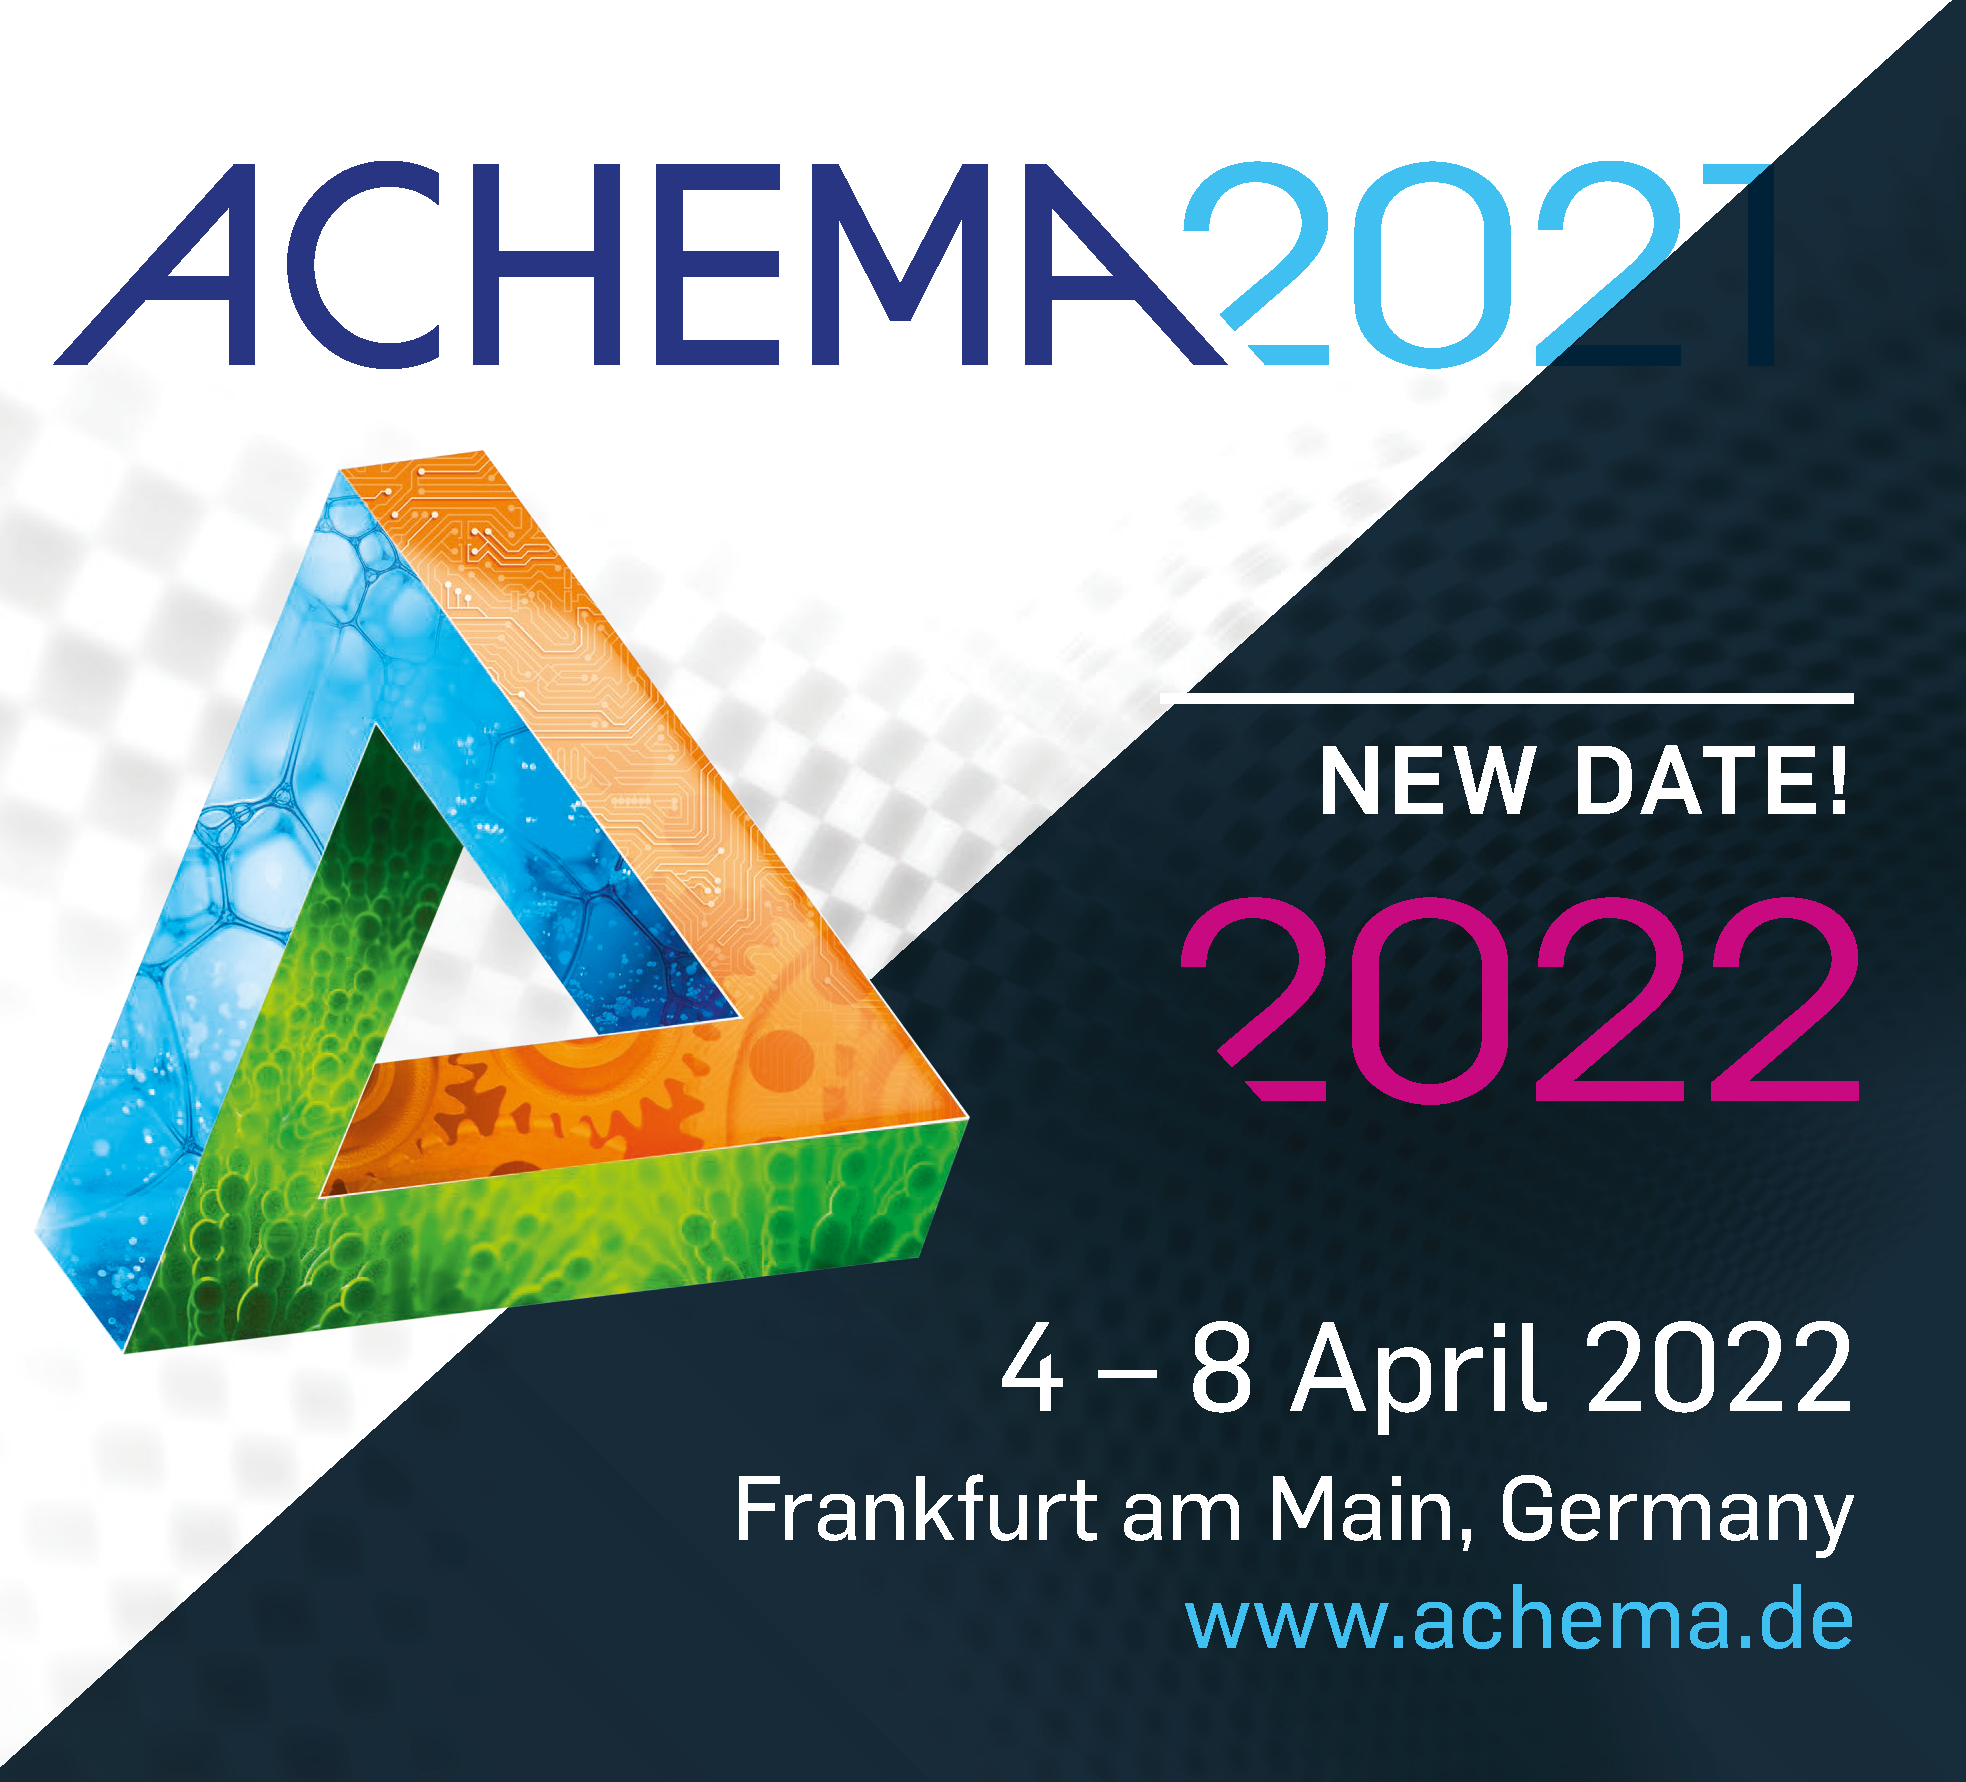 The organisers see the postponement as an opportunity to create a diverse, lively and multi-sensorial ACHEMA 2022.